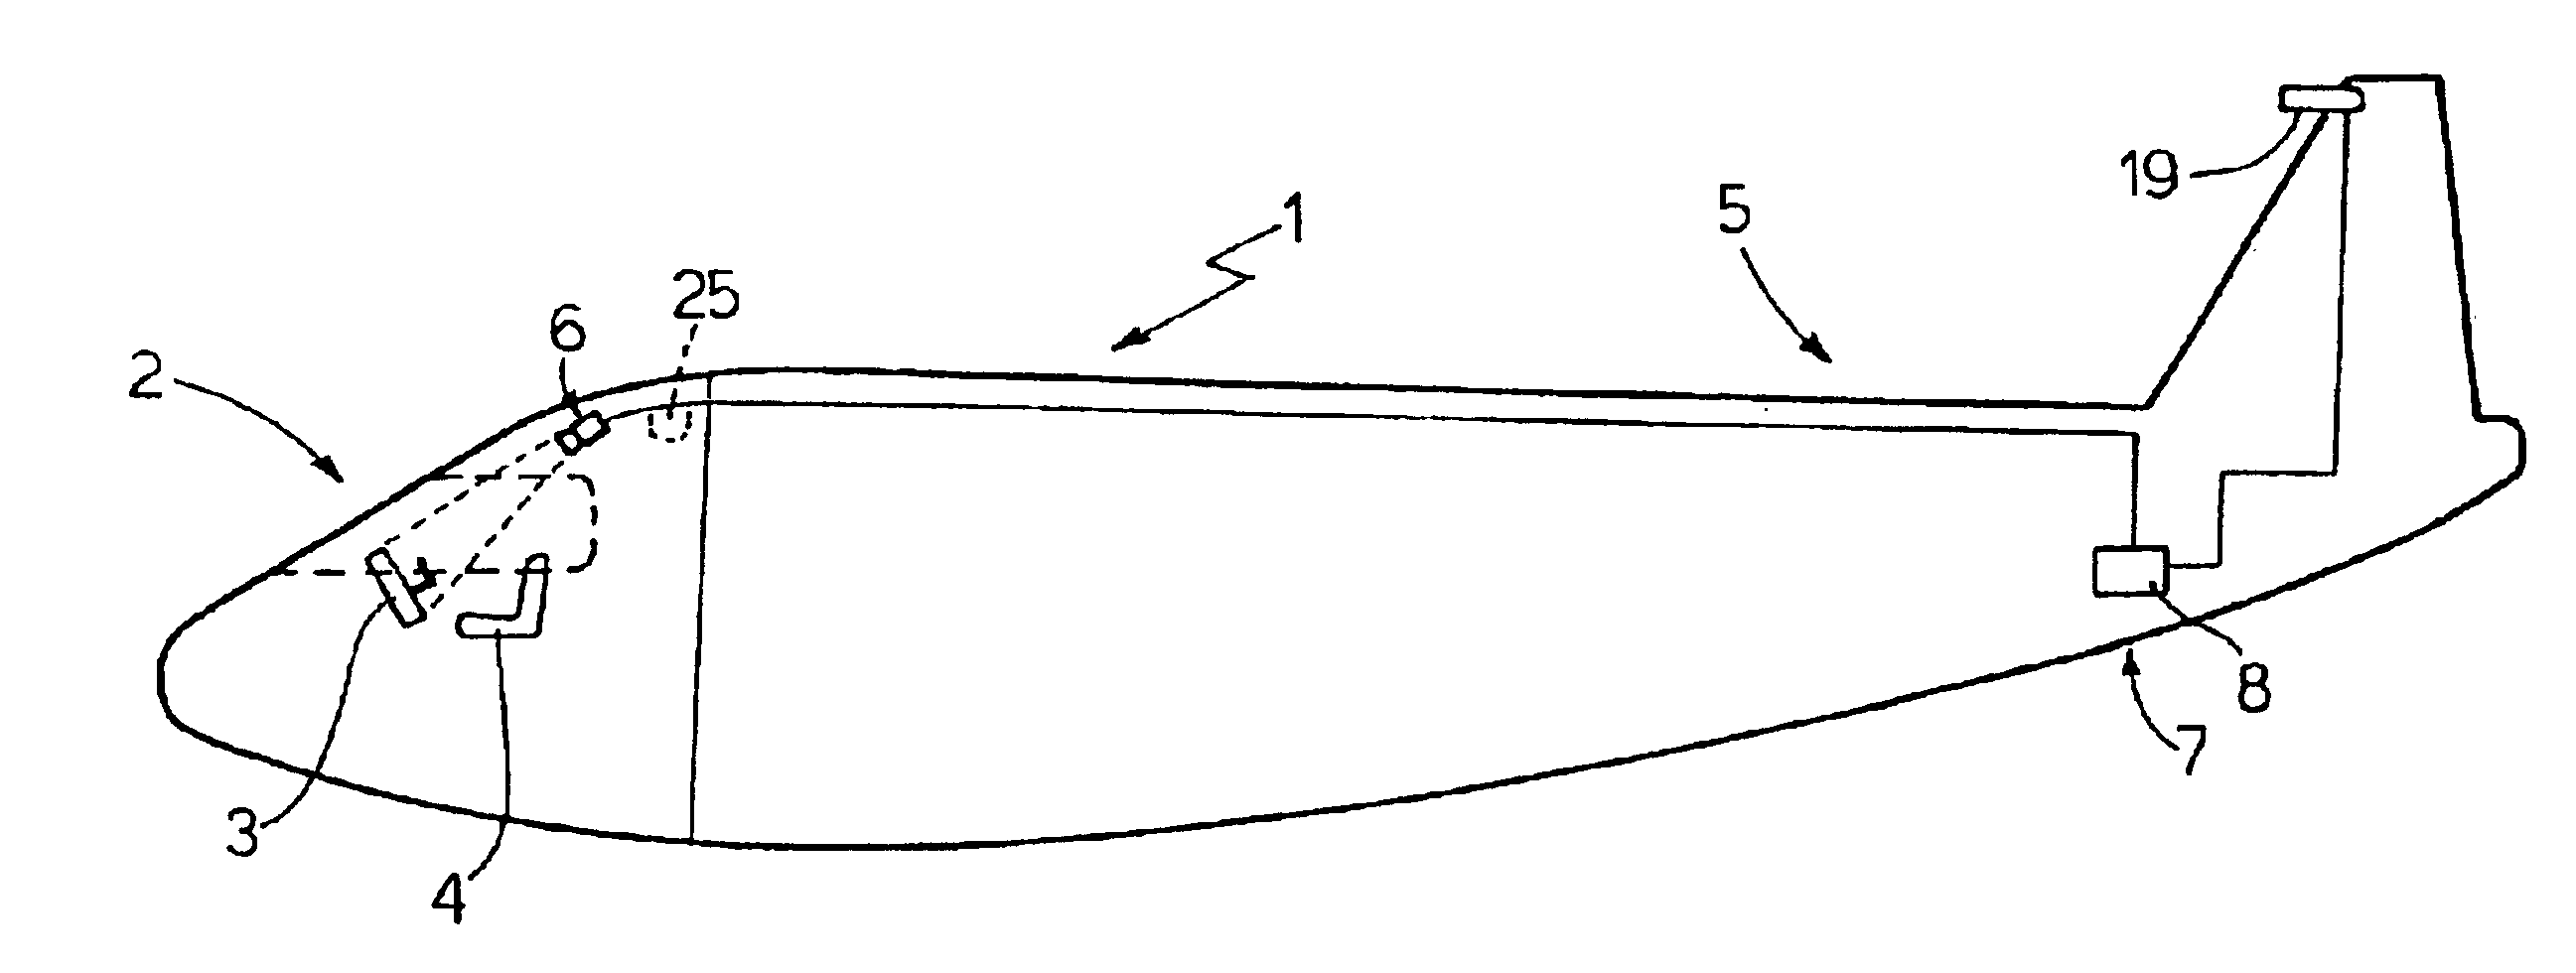 Method and system for acquiring and recording data relative to the movement of an aircraft